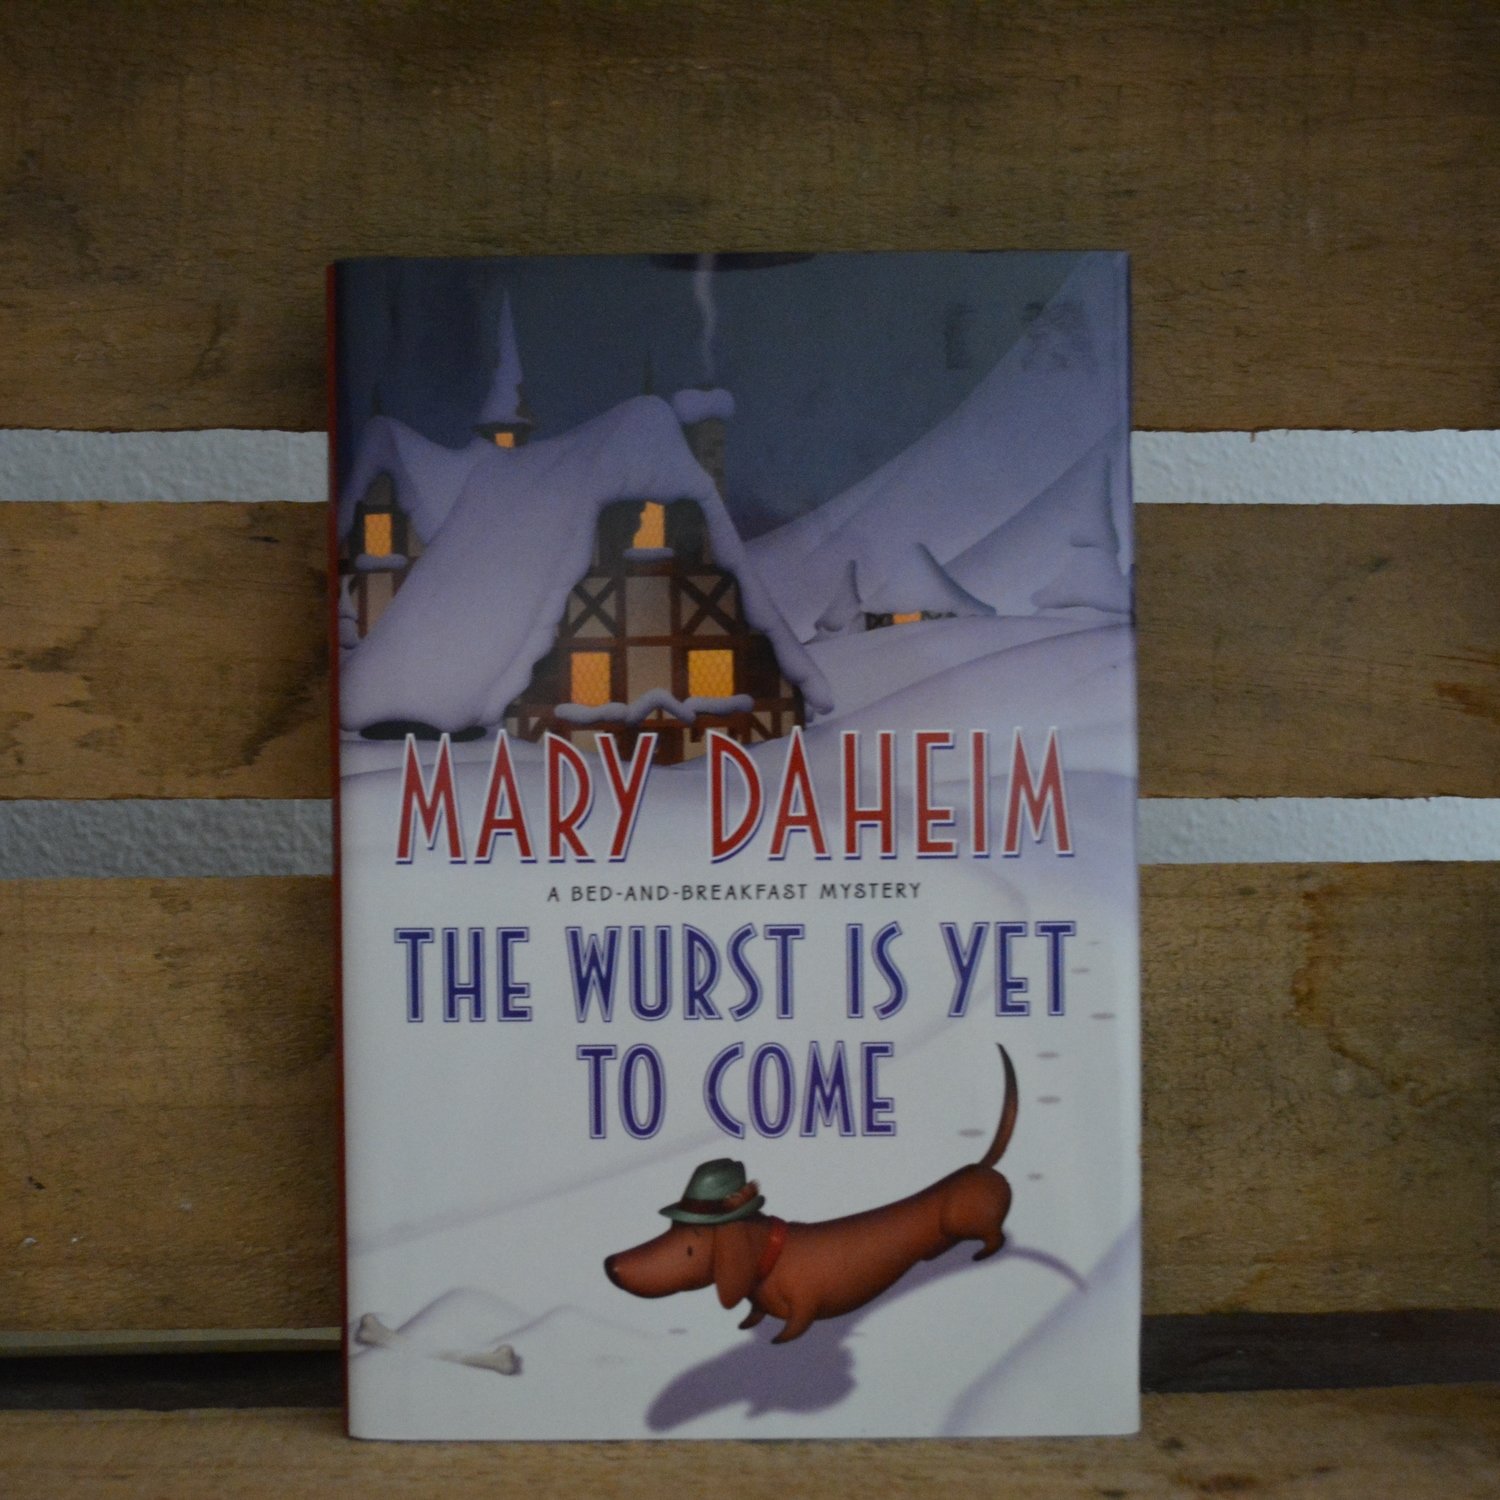 The Wurst is Yet to Come by Mary Daheim